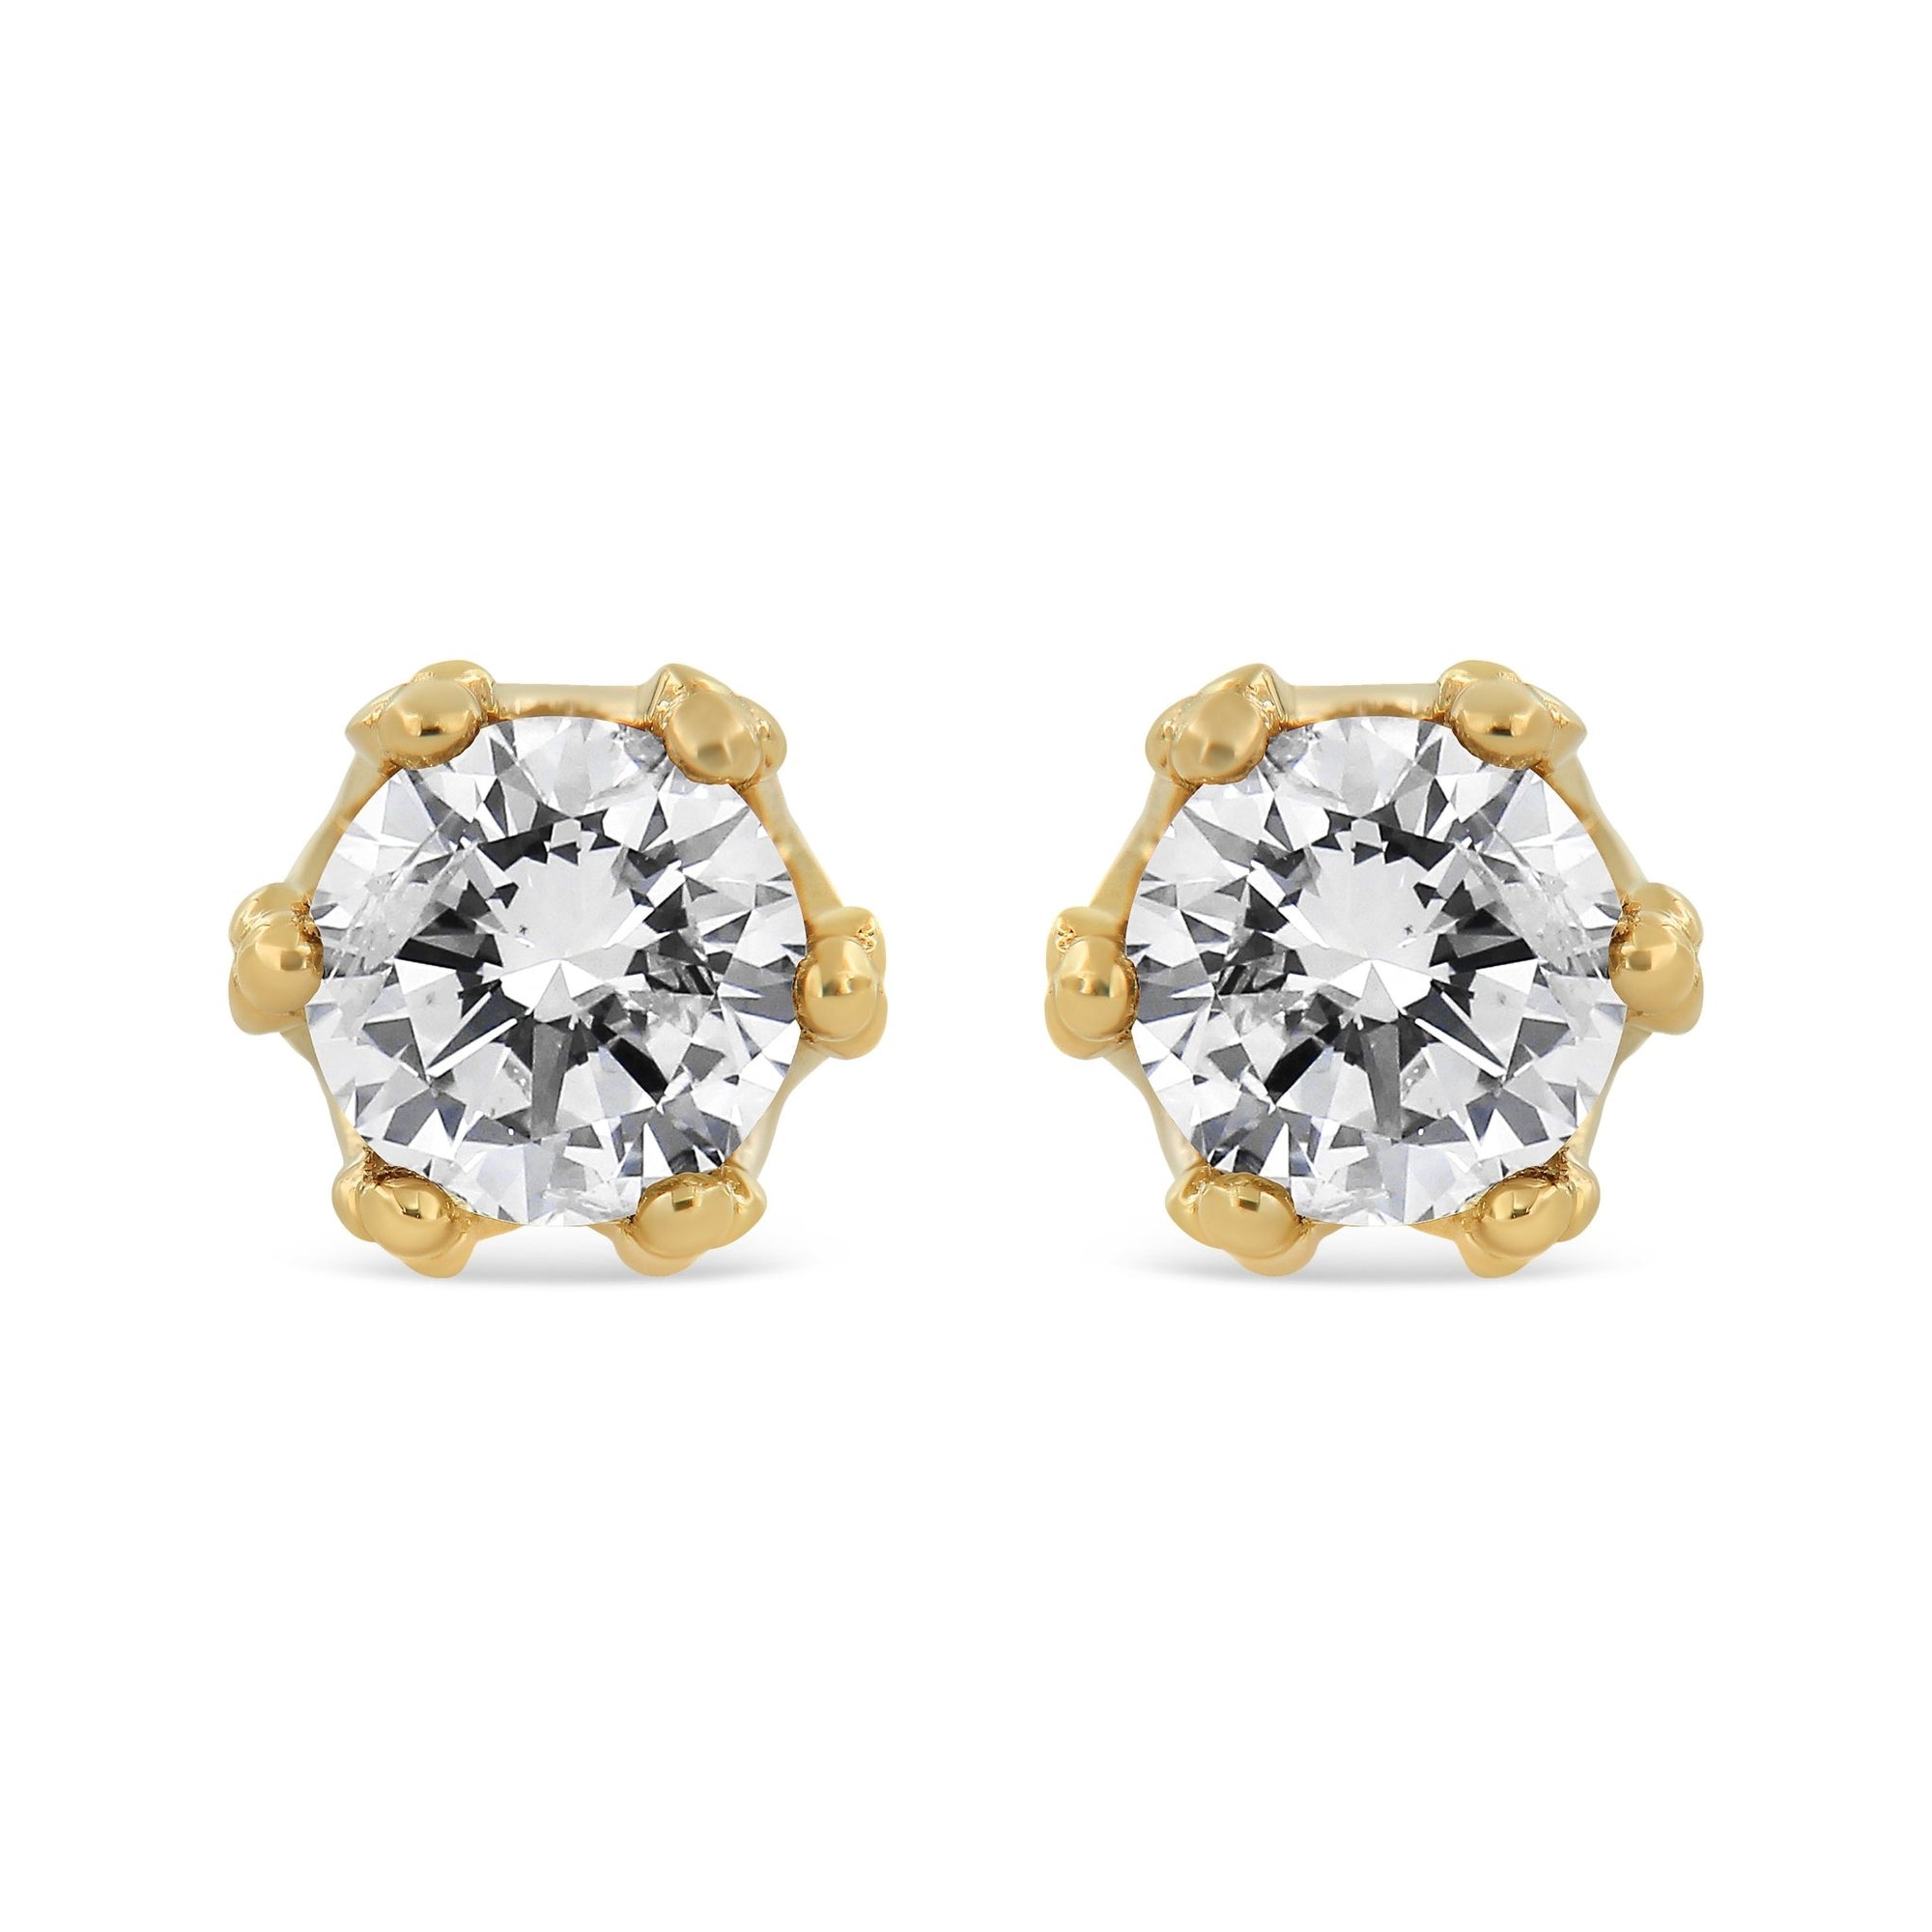 14K Yellow Gold 2.0 Cttw Round Diamond Crown Stud Earrings (I-J Color, I1-I2 Clarity) - LinkagejewelrydesignLinkagejewelrydesign